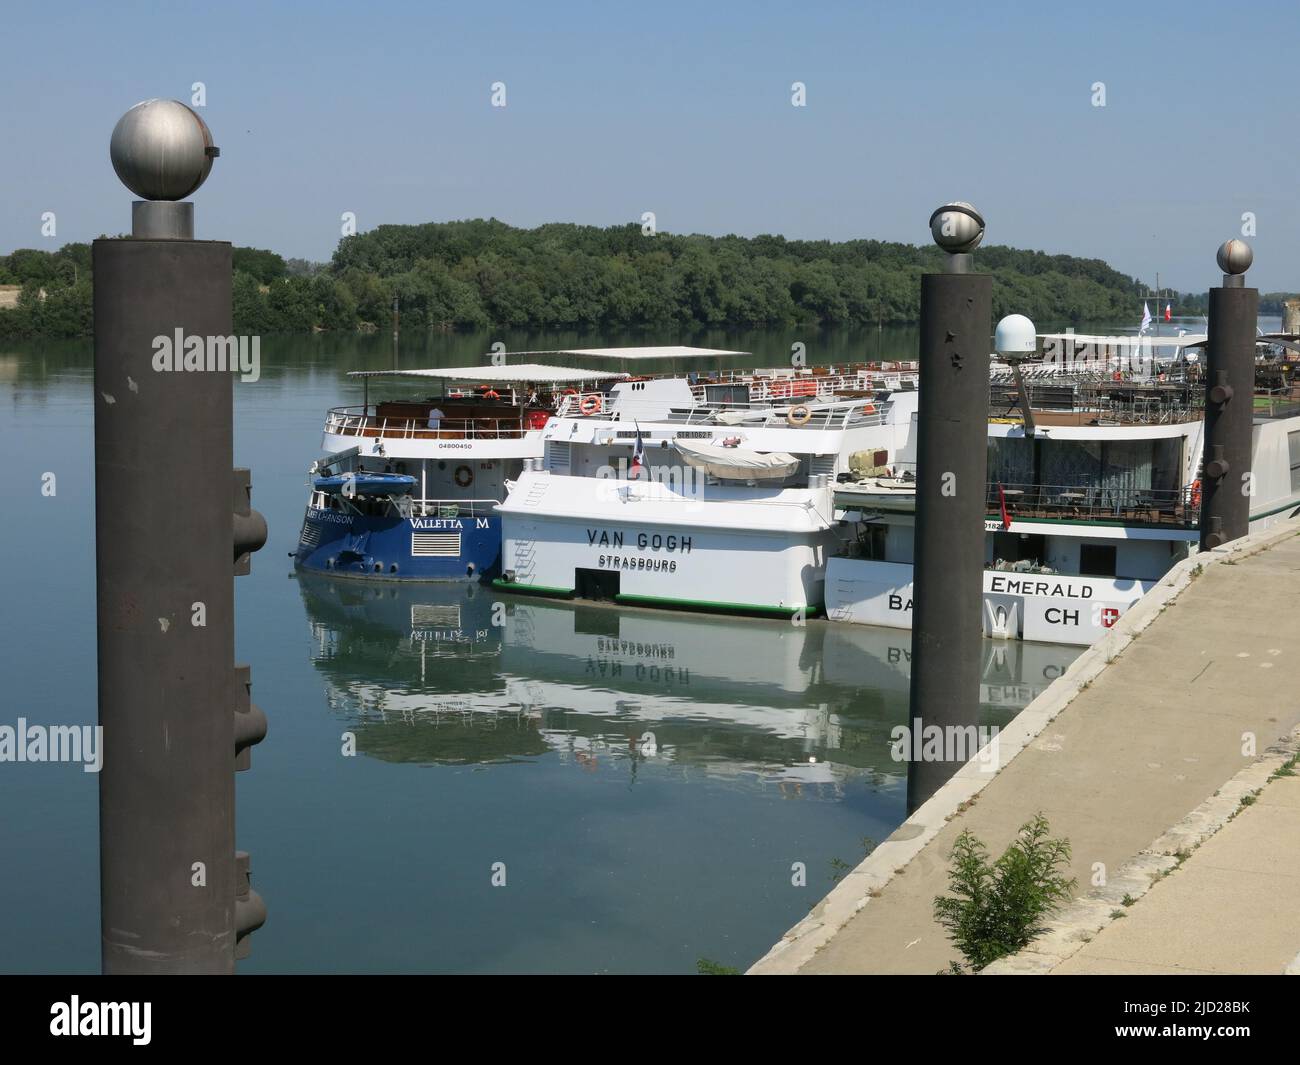 It is common practice on river cruises to moor three boats alongside each other and passengers must disembark across all three to reach the shore. Stock Photo